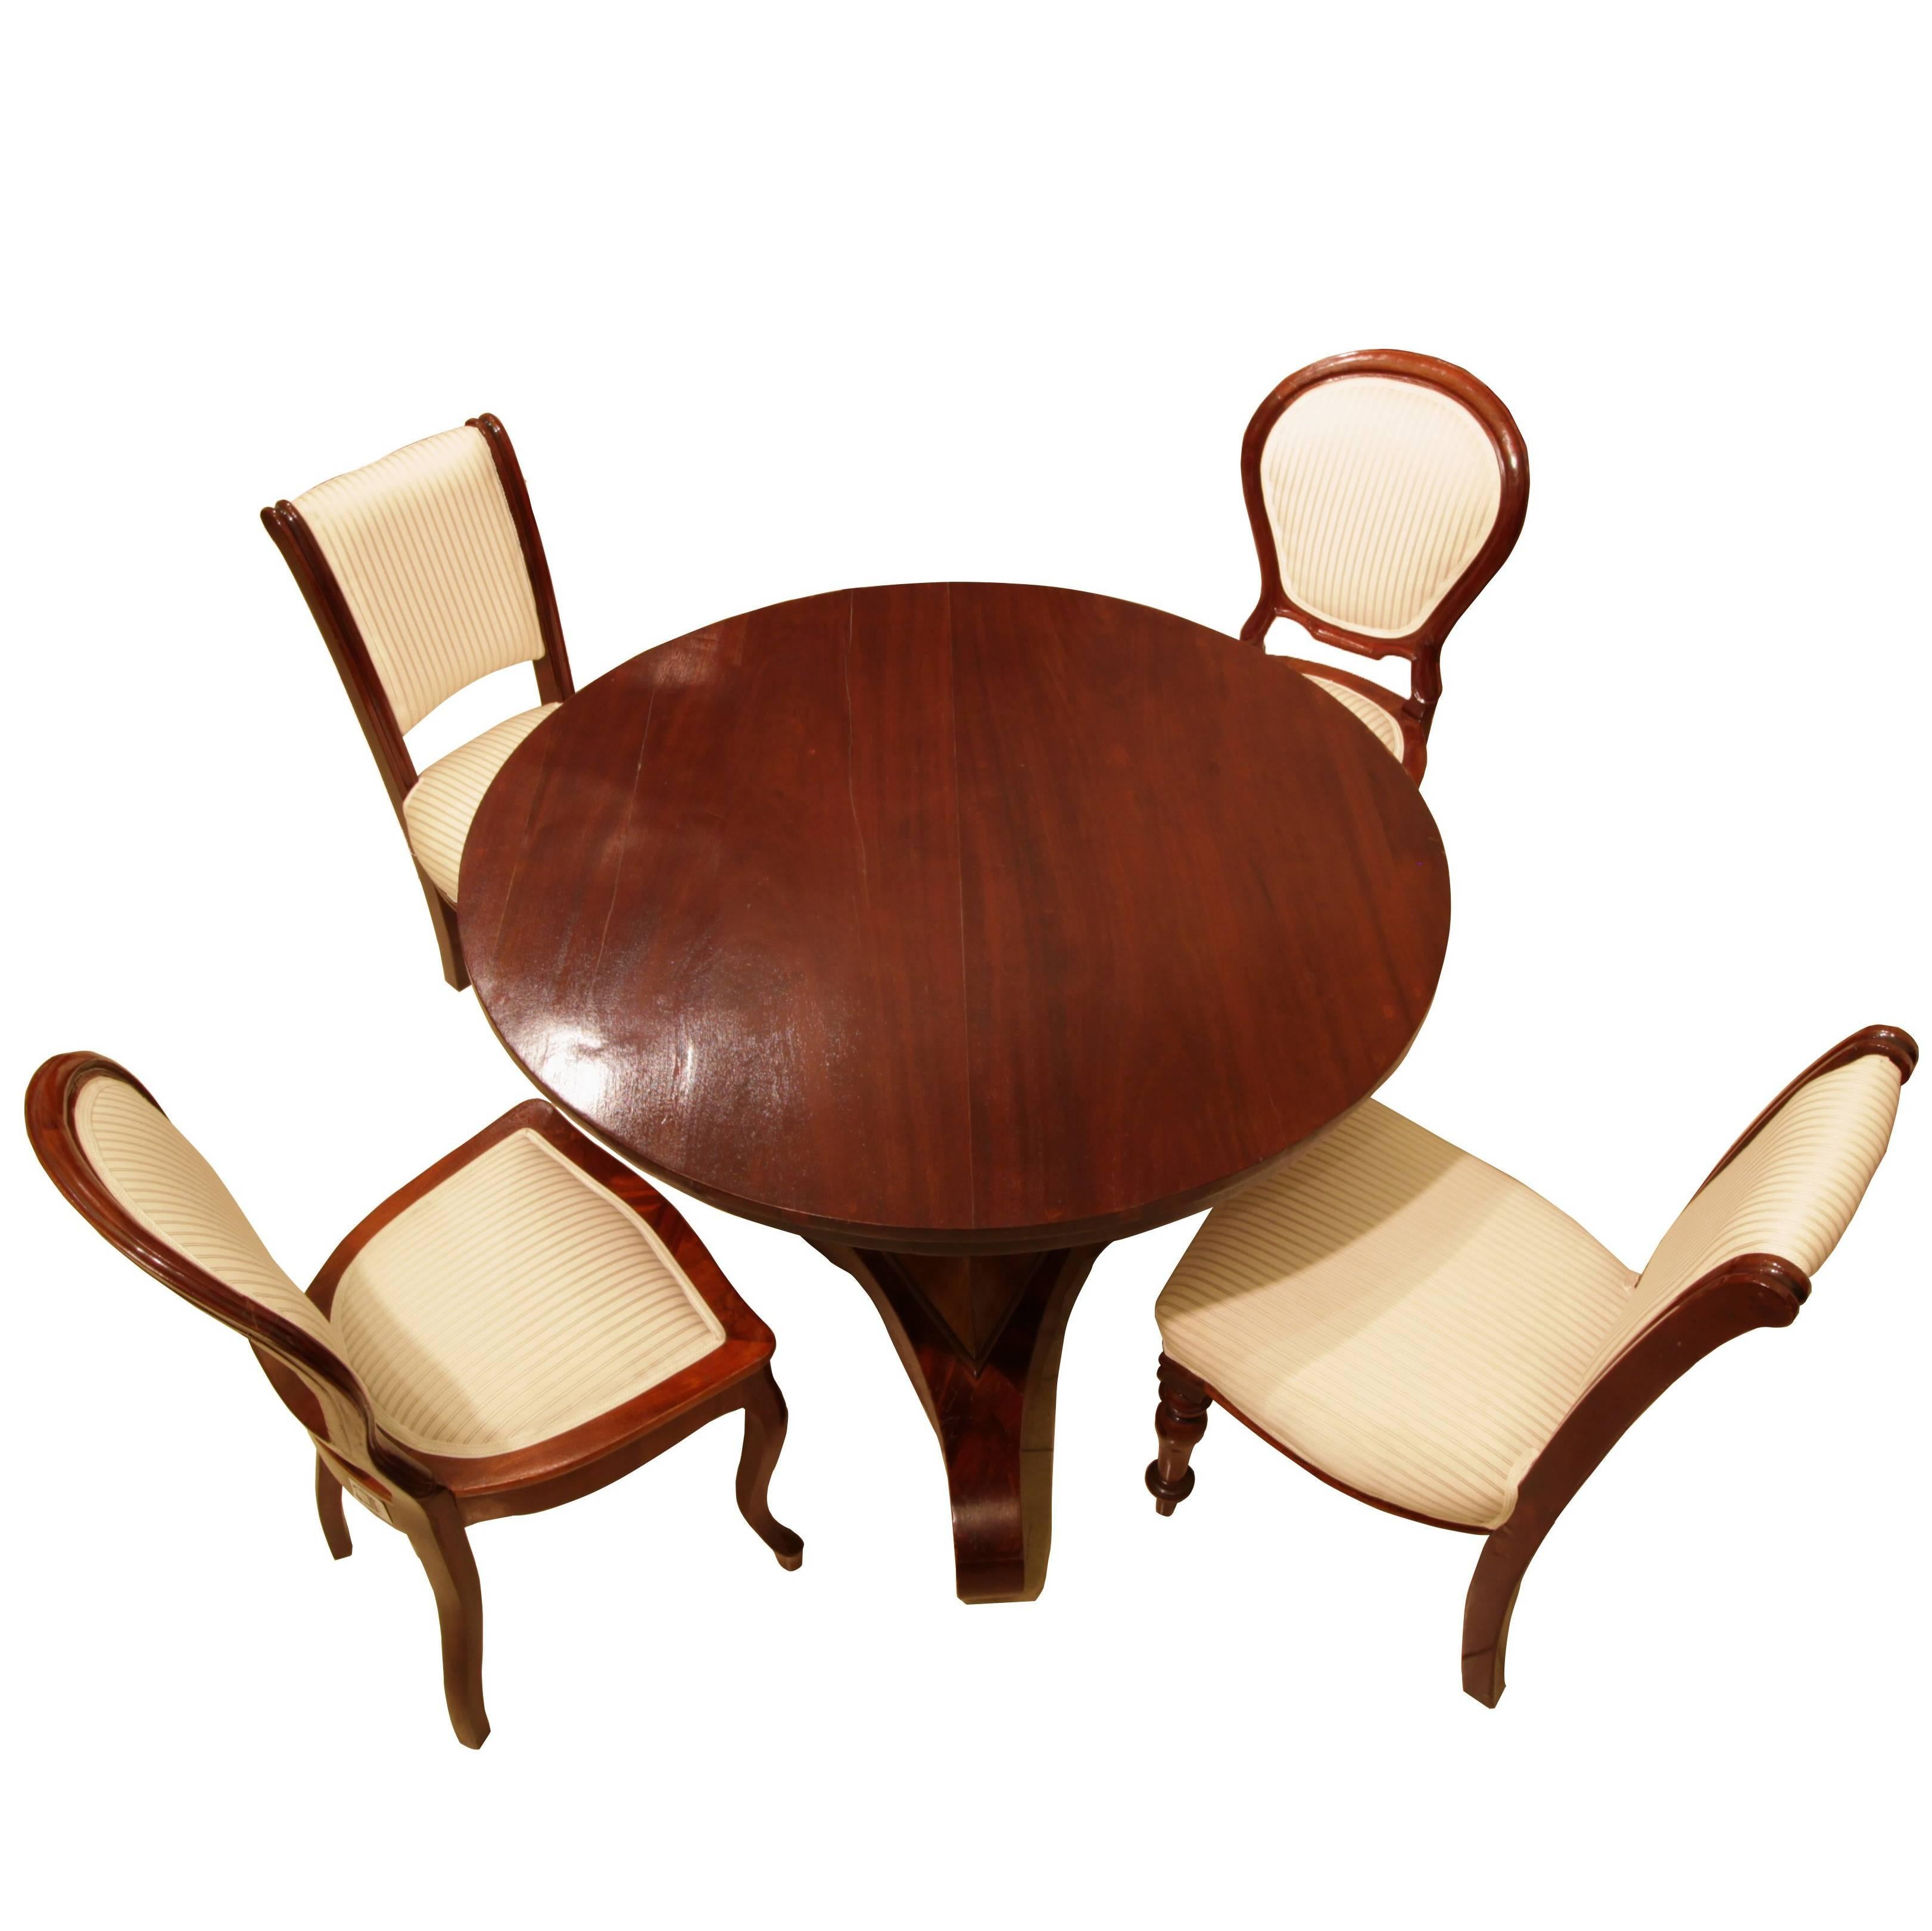 19th Century, Mahogany Set of Center Table and Four Chairs